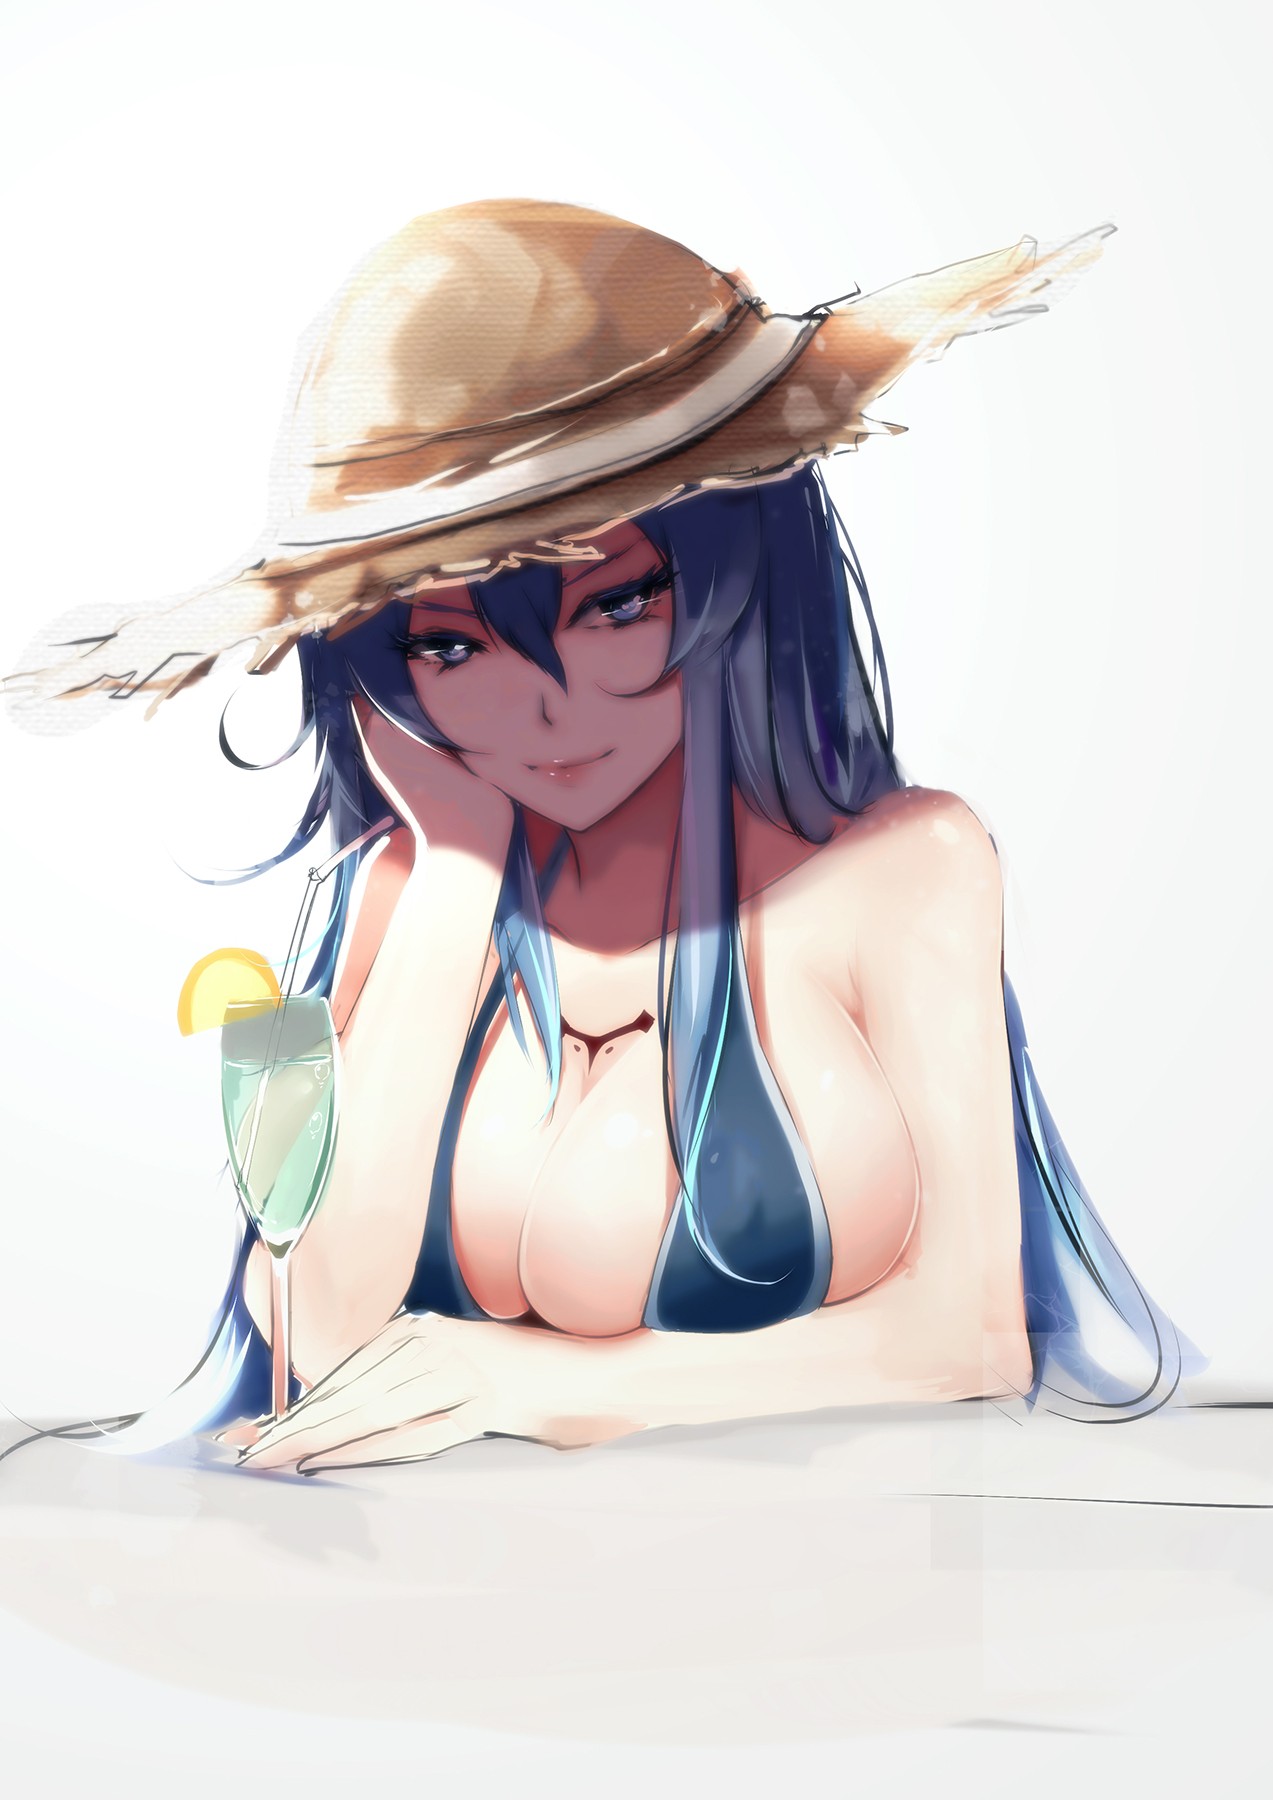 Anime 1273x1800 Akame ga Kill! anime girls Esdeath (Akame Ga Kill!) big boobs drinking glass huge breasts blue hair fan art straw hat BBA1985 cleavage boobs curvy hat women with hats white background simple background